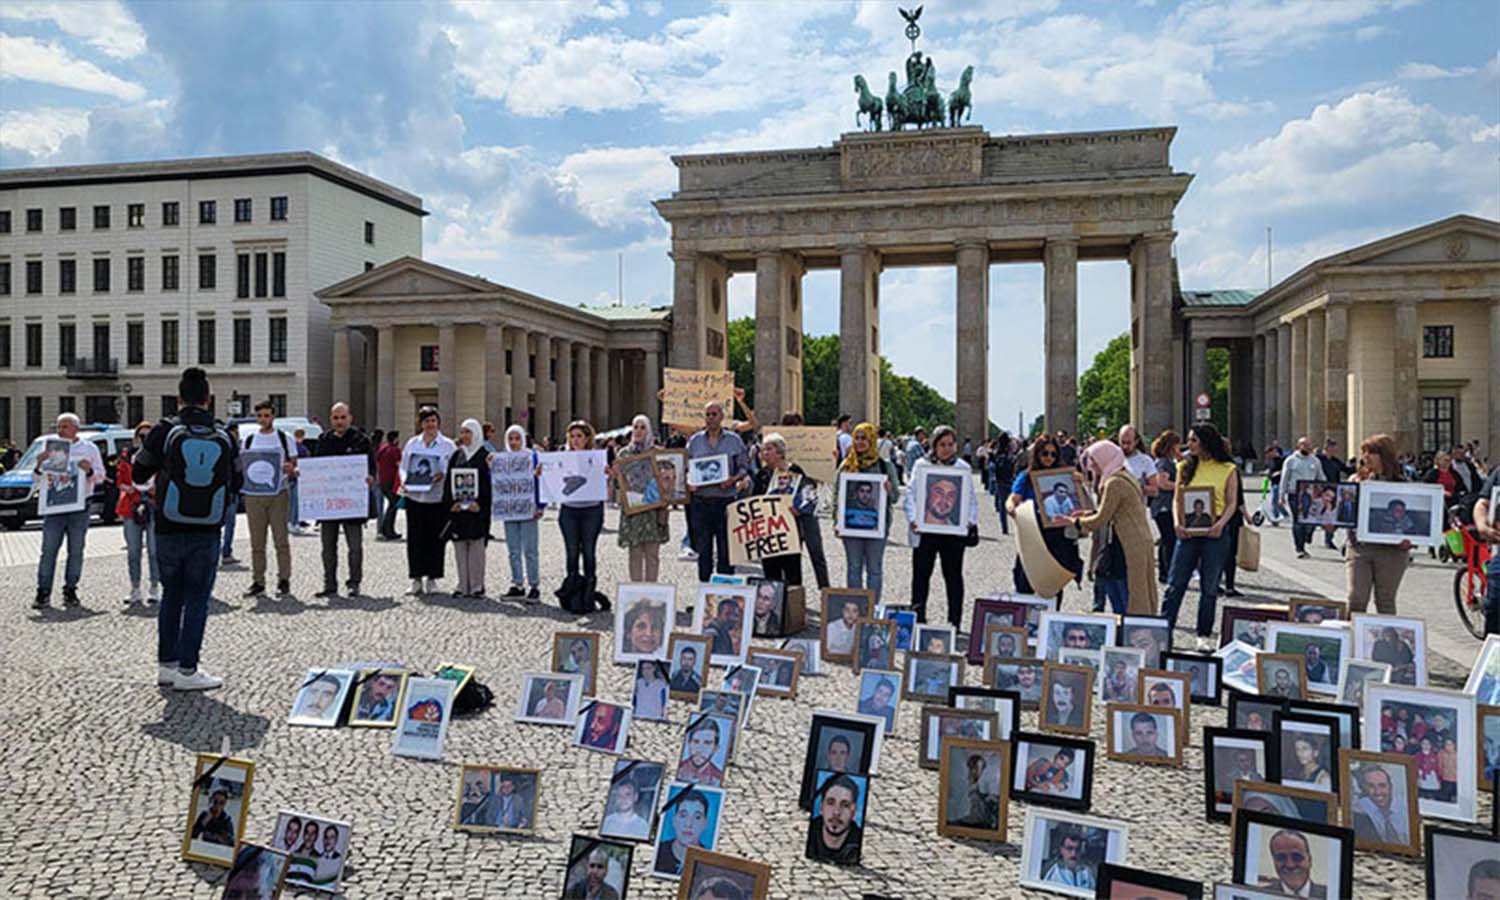 Syrian activists from the Families for Freedom group in Berlin show solidarity with the families of detainees in Syrian prisons and the missing in Berlin - May 7, 2022 (Families for Freedom)